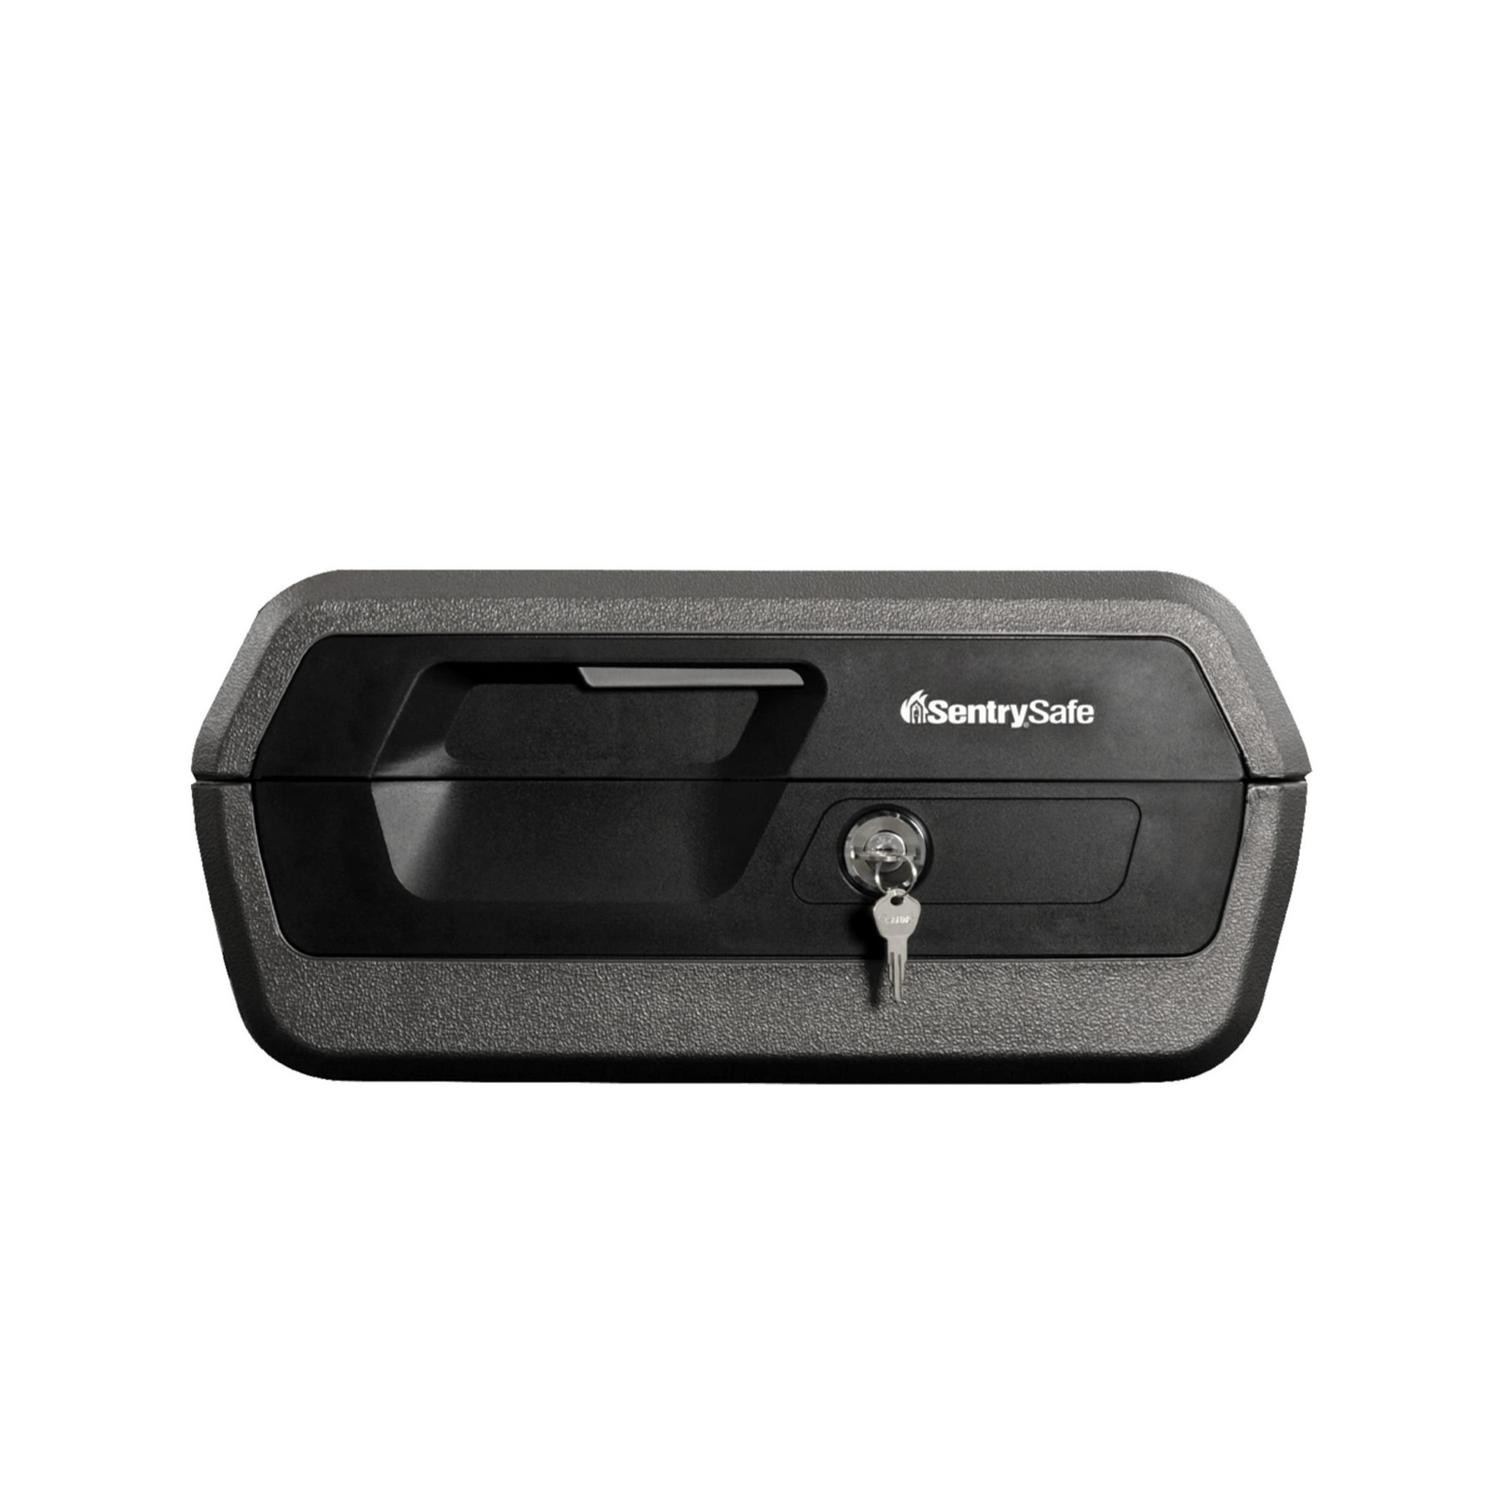 SentrySafe CHW30100 Fire-Resistant and Water-Resistant Safe Box with Key Lock， 0.36 Cu. ft.